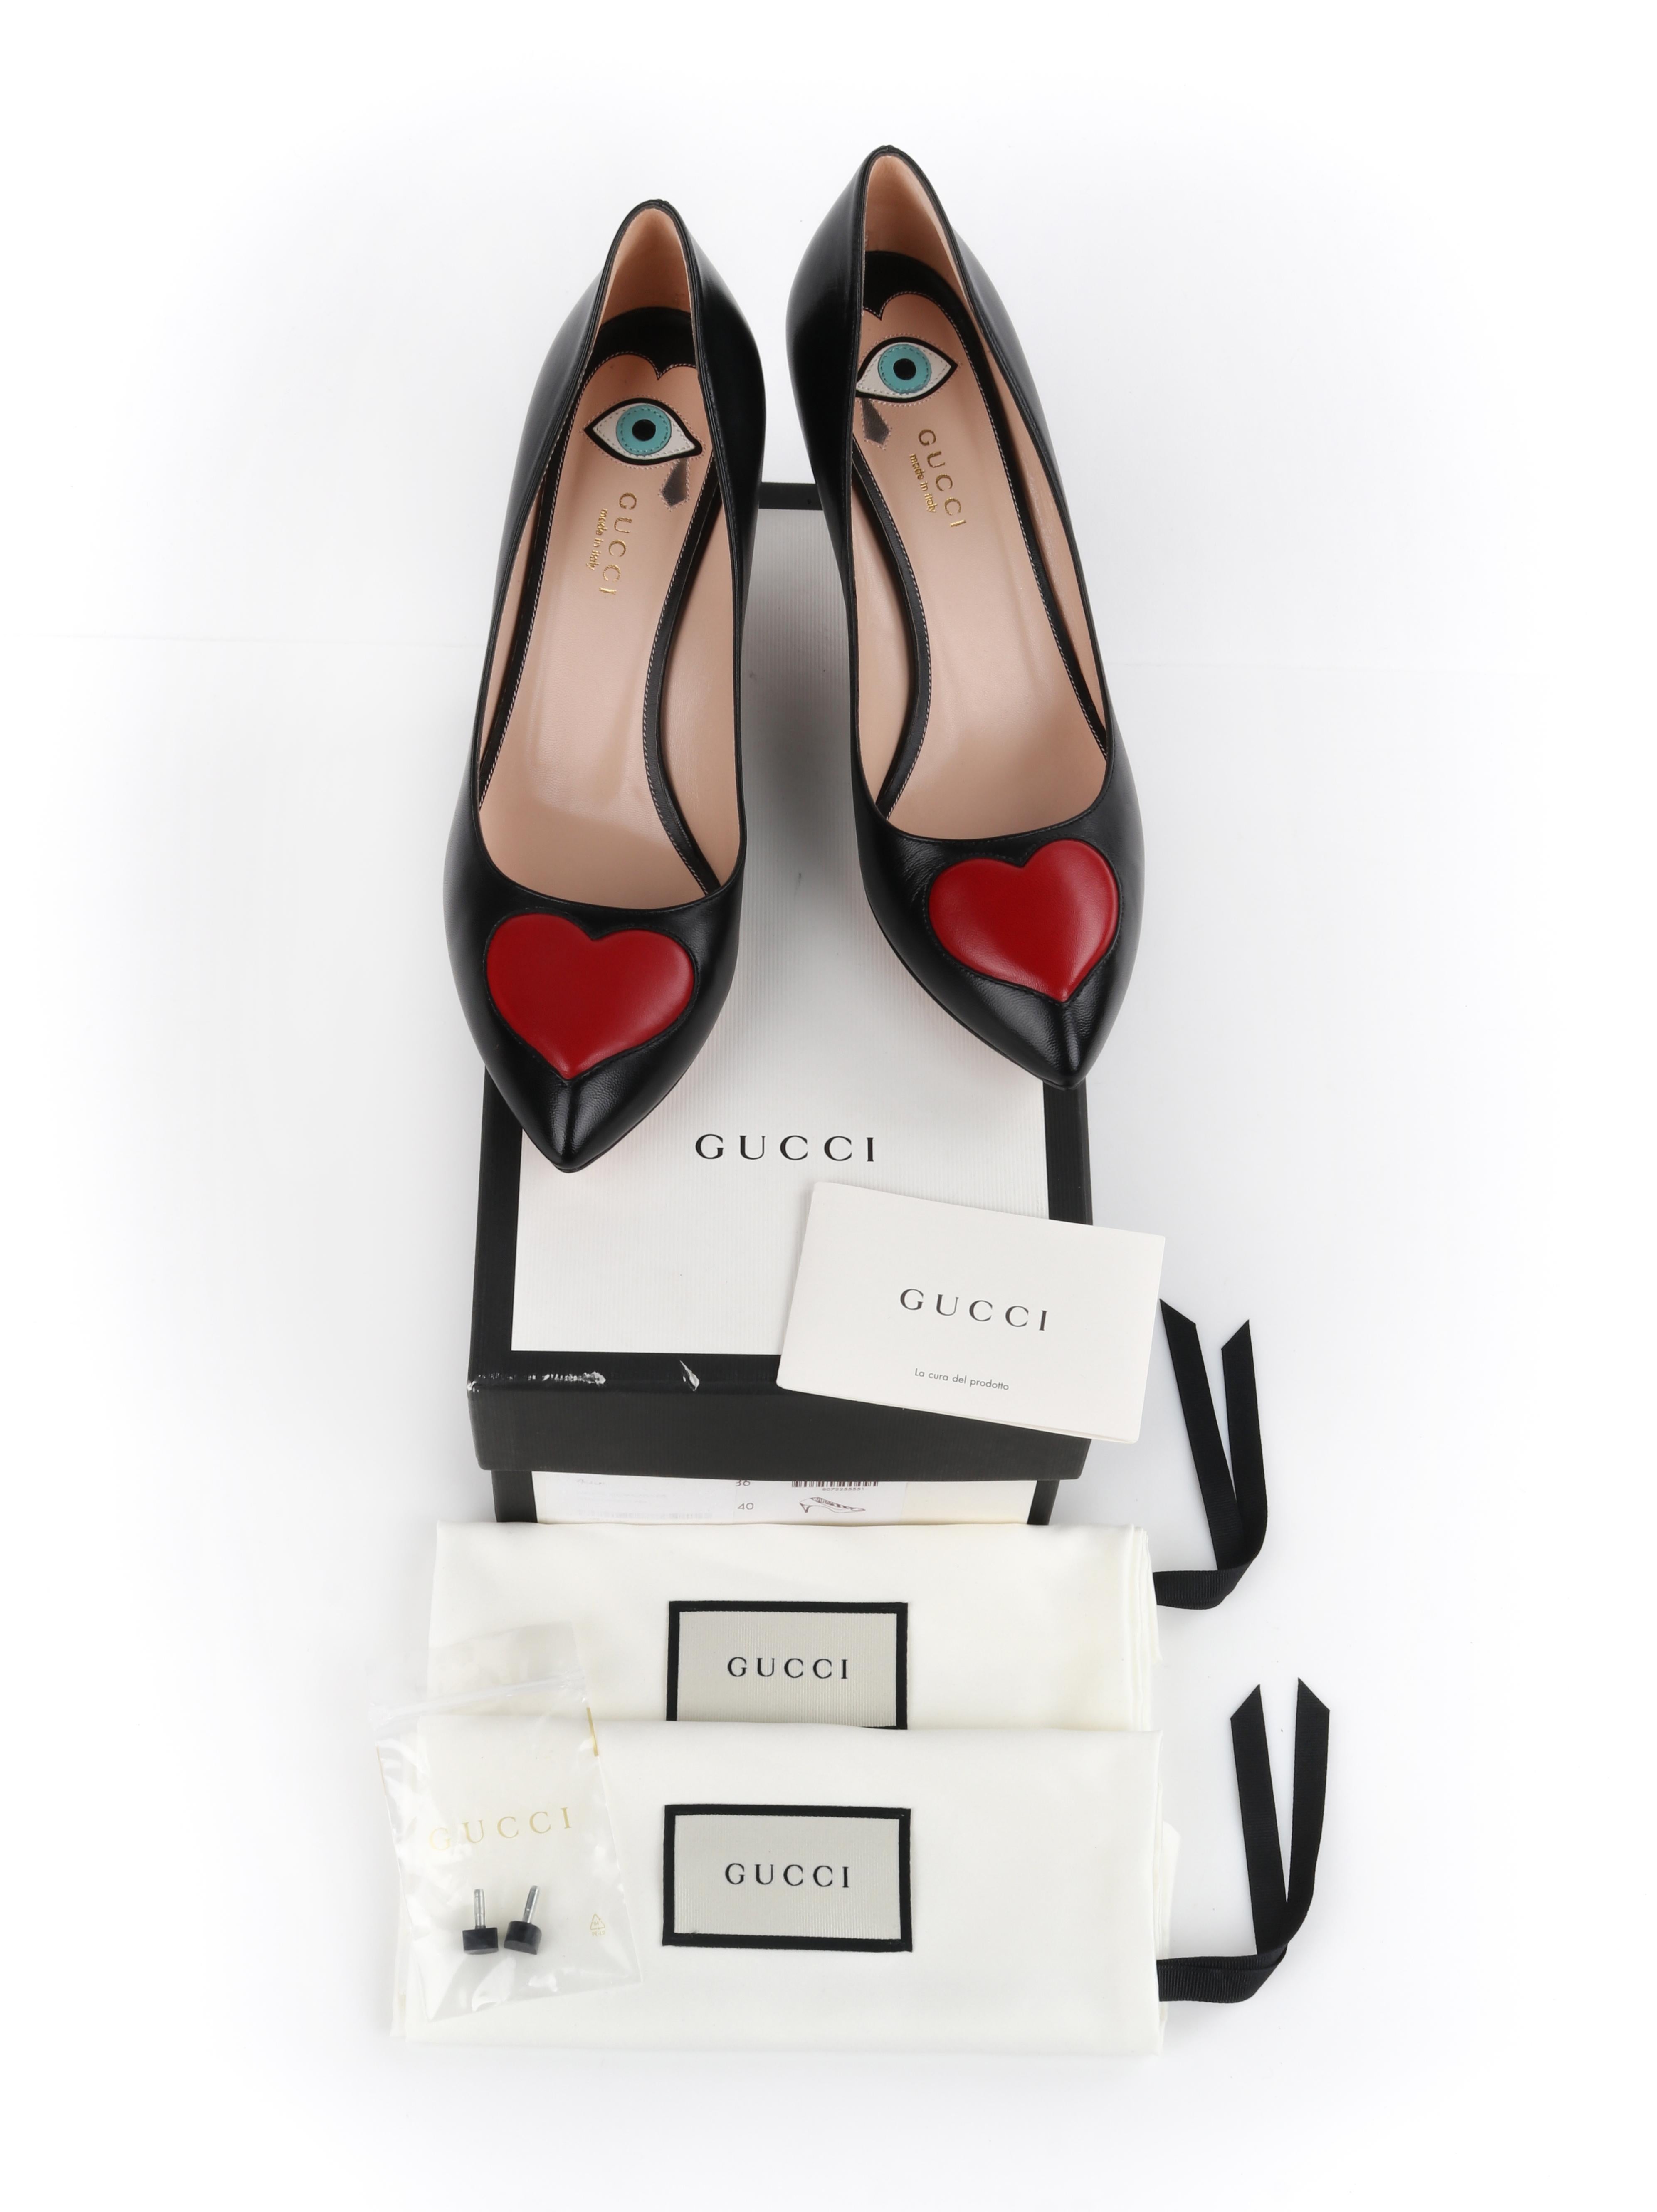 GUCCI Pre-Fall 2016 Black Red Leather Heart Pointed Toe Kitten Heel Pumps NIB
 
Brand / Manufacturer: Gucci
Collection: Pre-Fall 2016
Designer: Alessandro Michele
Style: Kitten heel pumps
Color(s): Exterior: black, red; Interior: black, tan, blue,